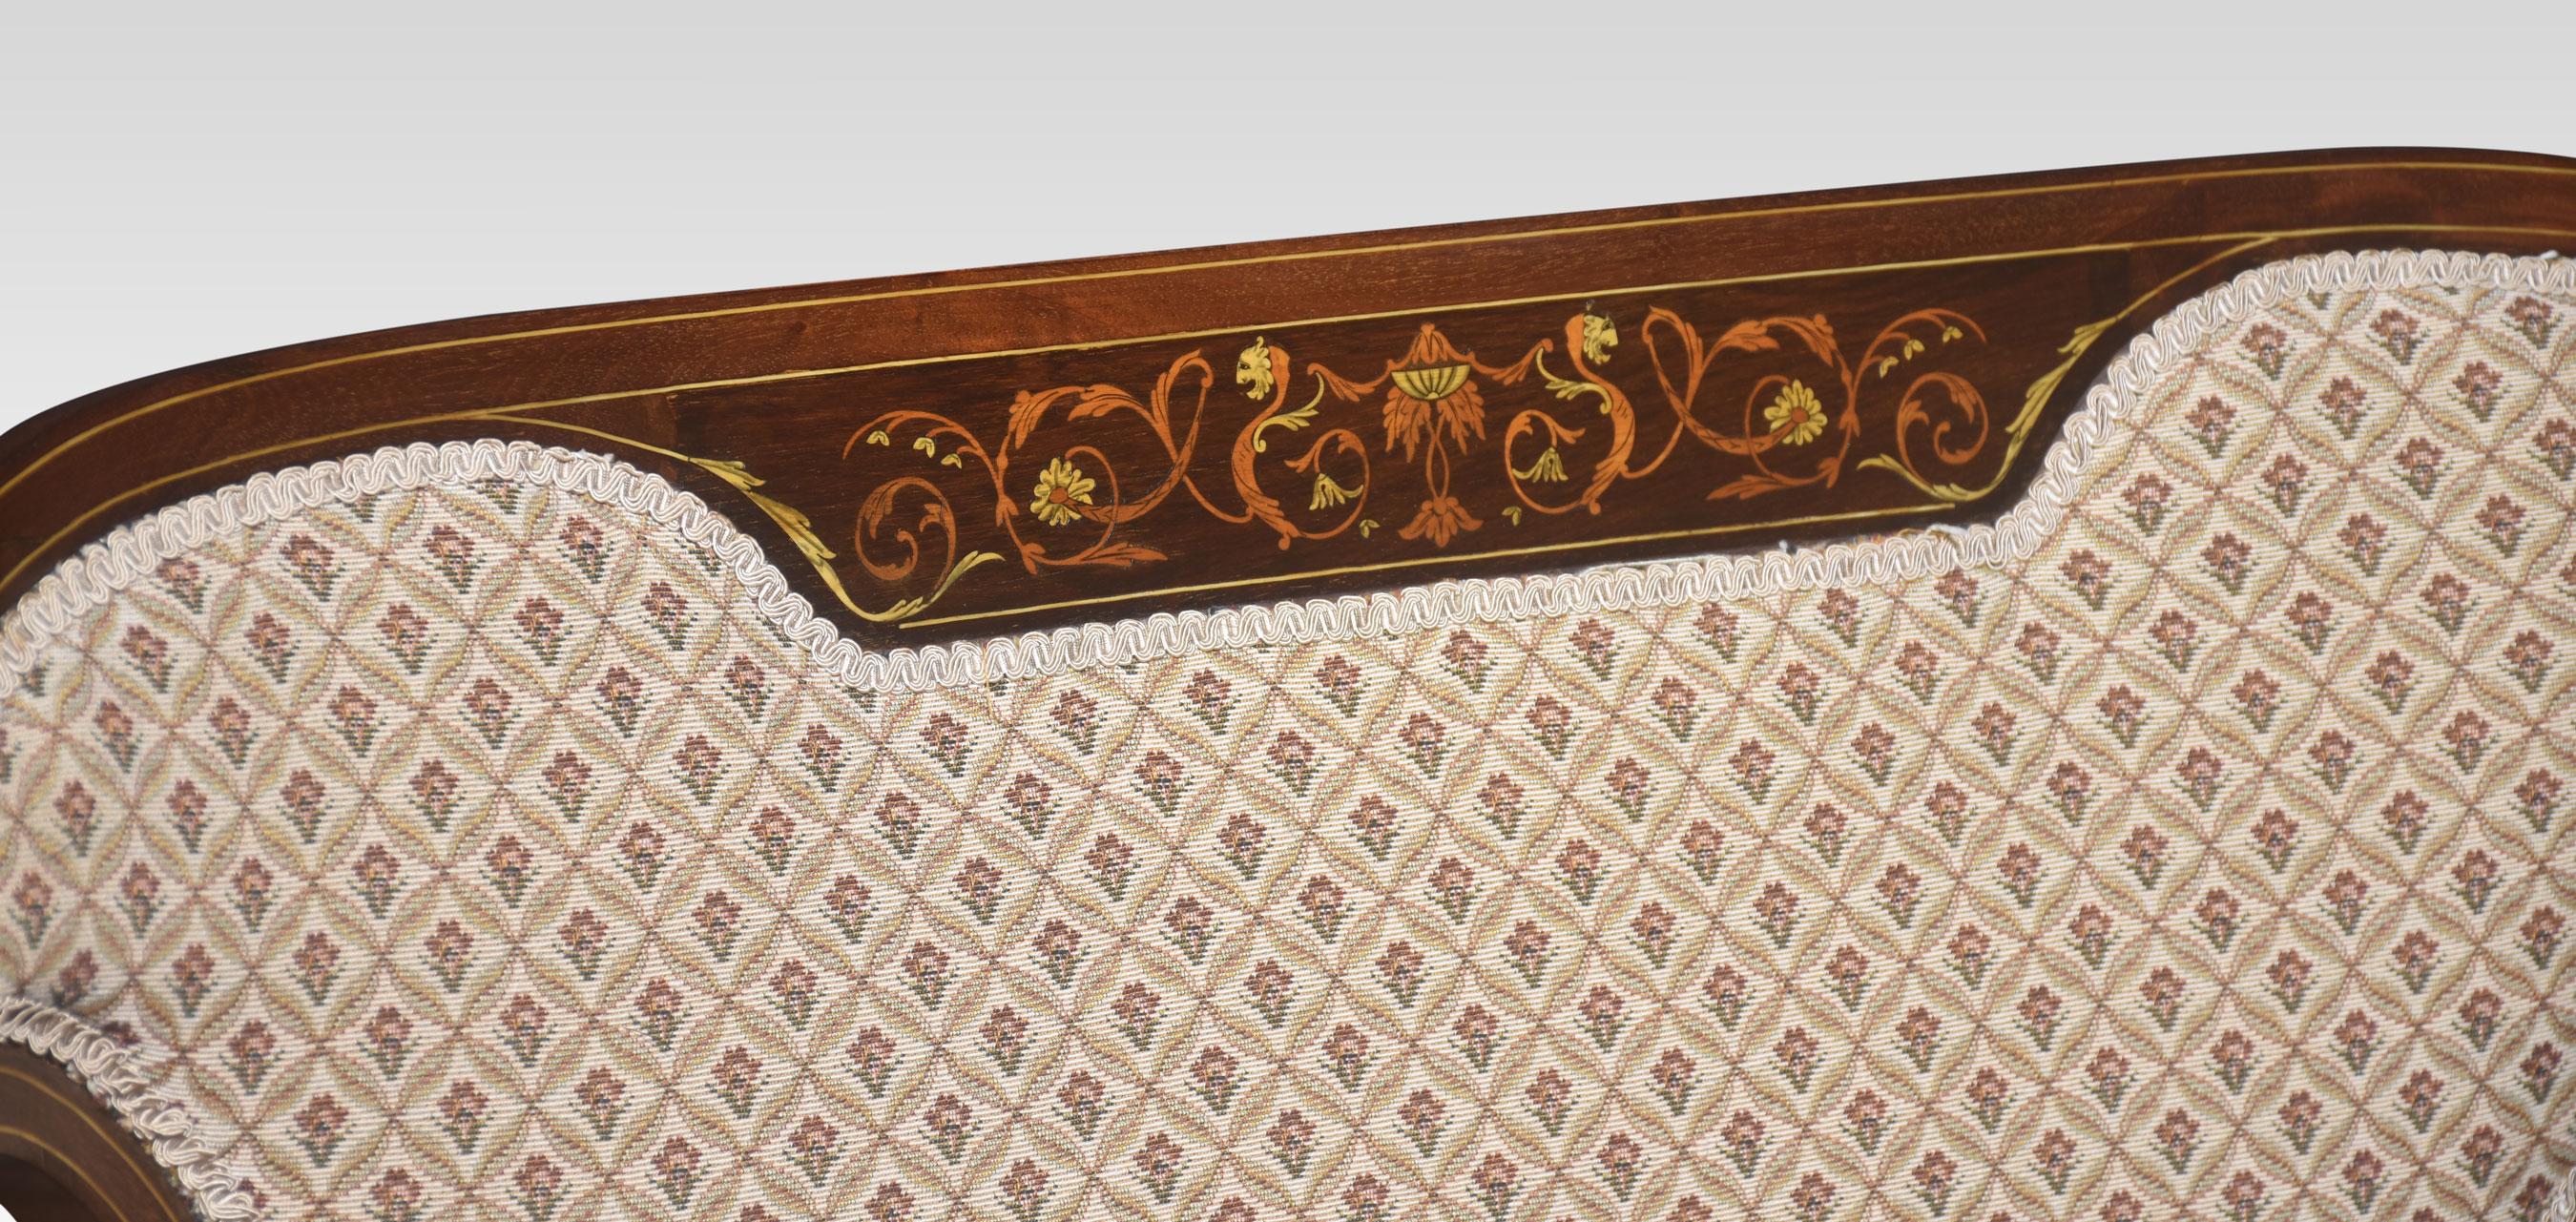 Marquetry inlaid settee. Having a shaped back with fine marquetry and pen-work inlaid panel above the central padded back, flanked by pierced fretwork panels, with open arms and a padded seat. Supported on slender tapering